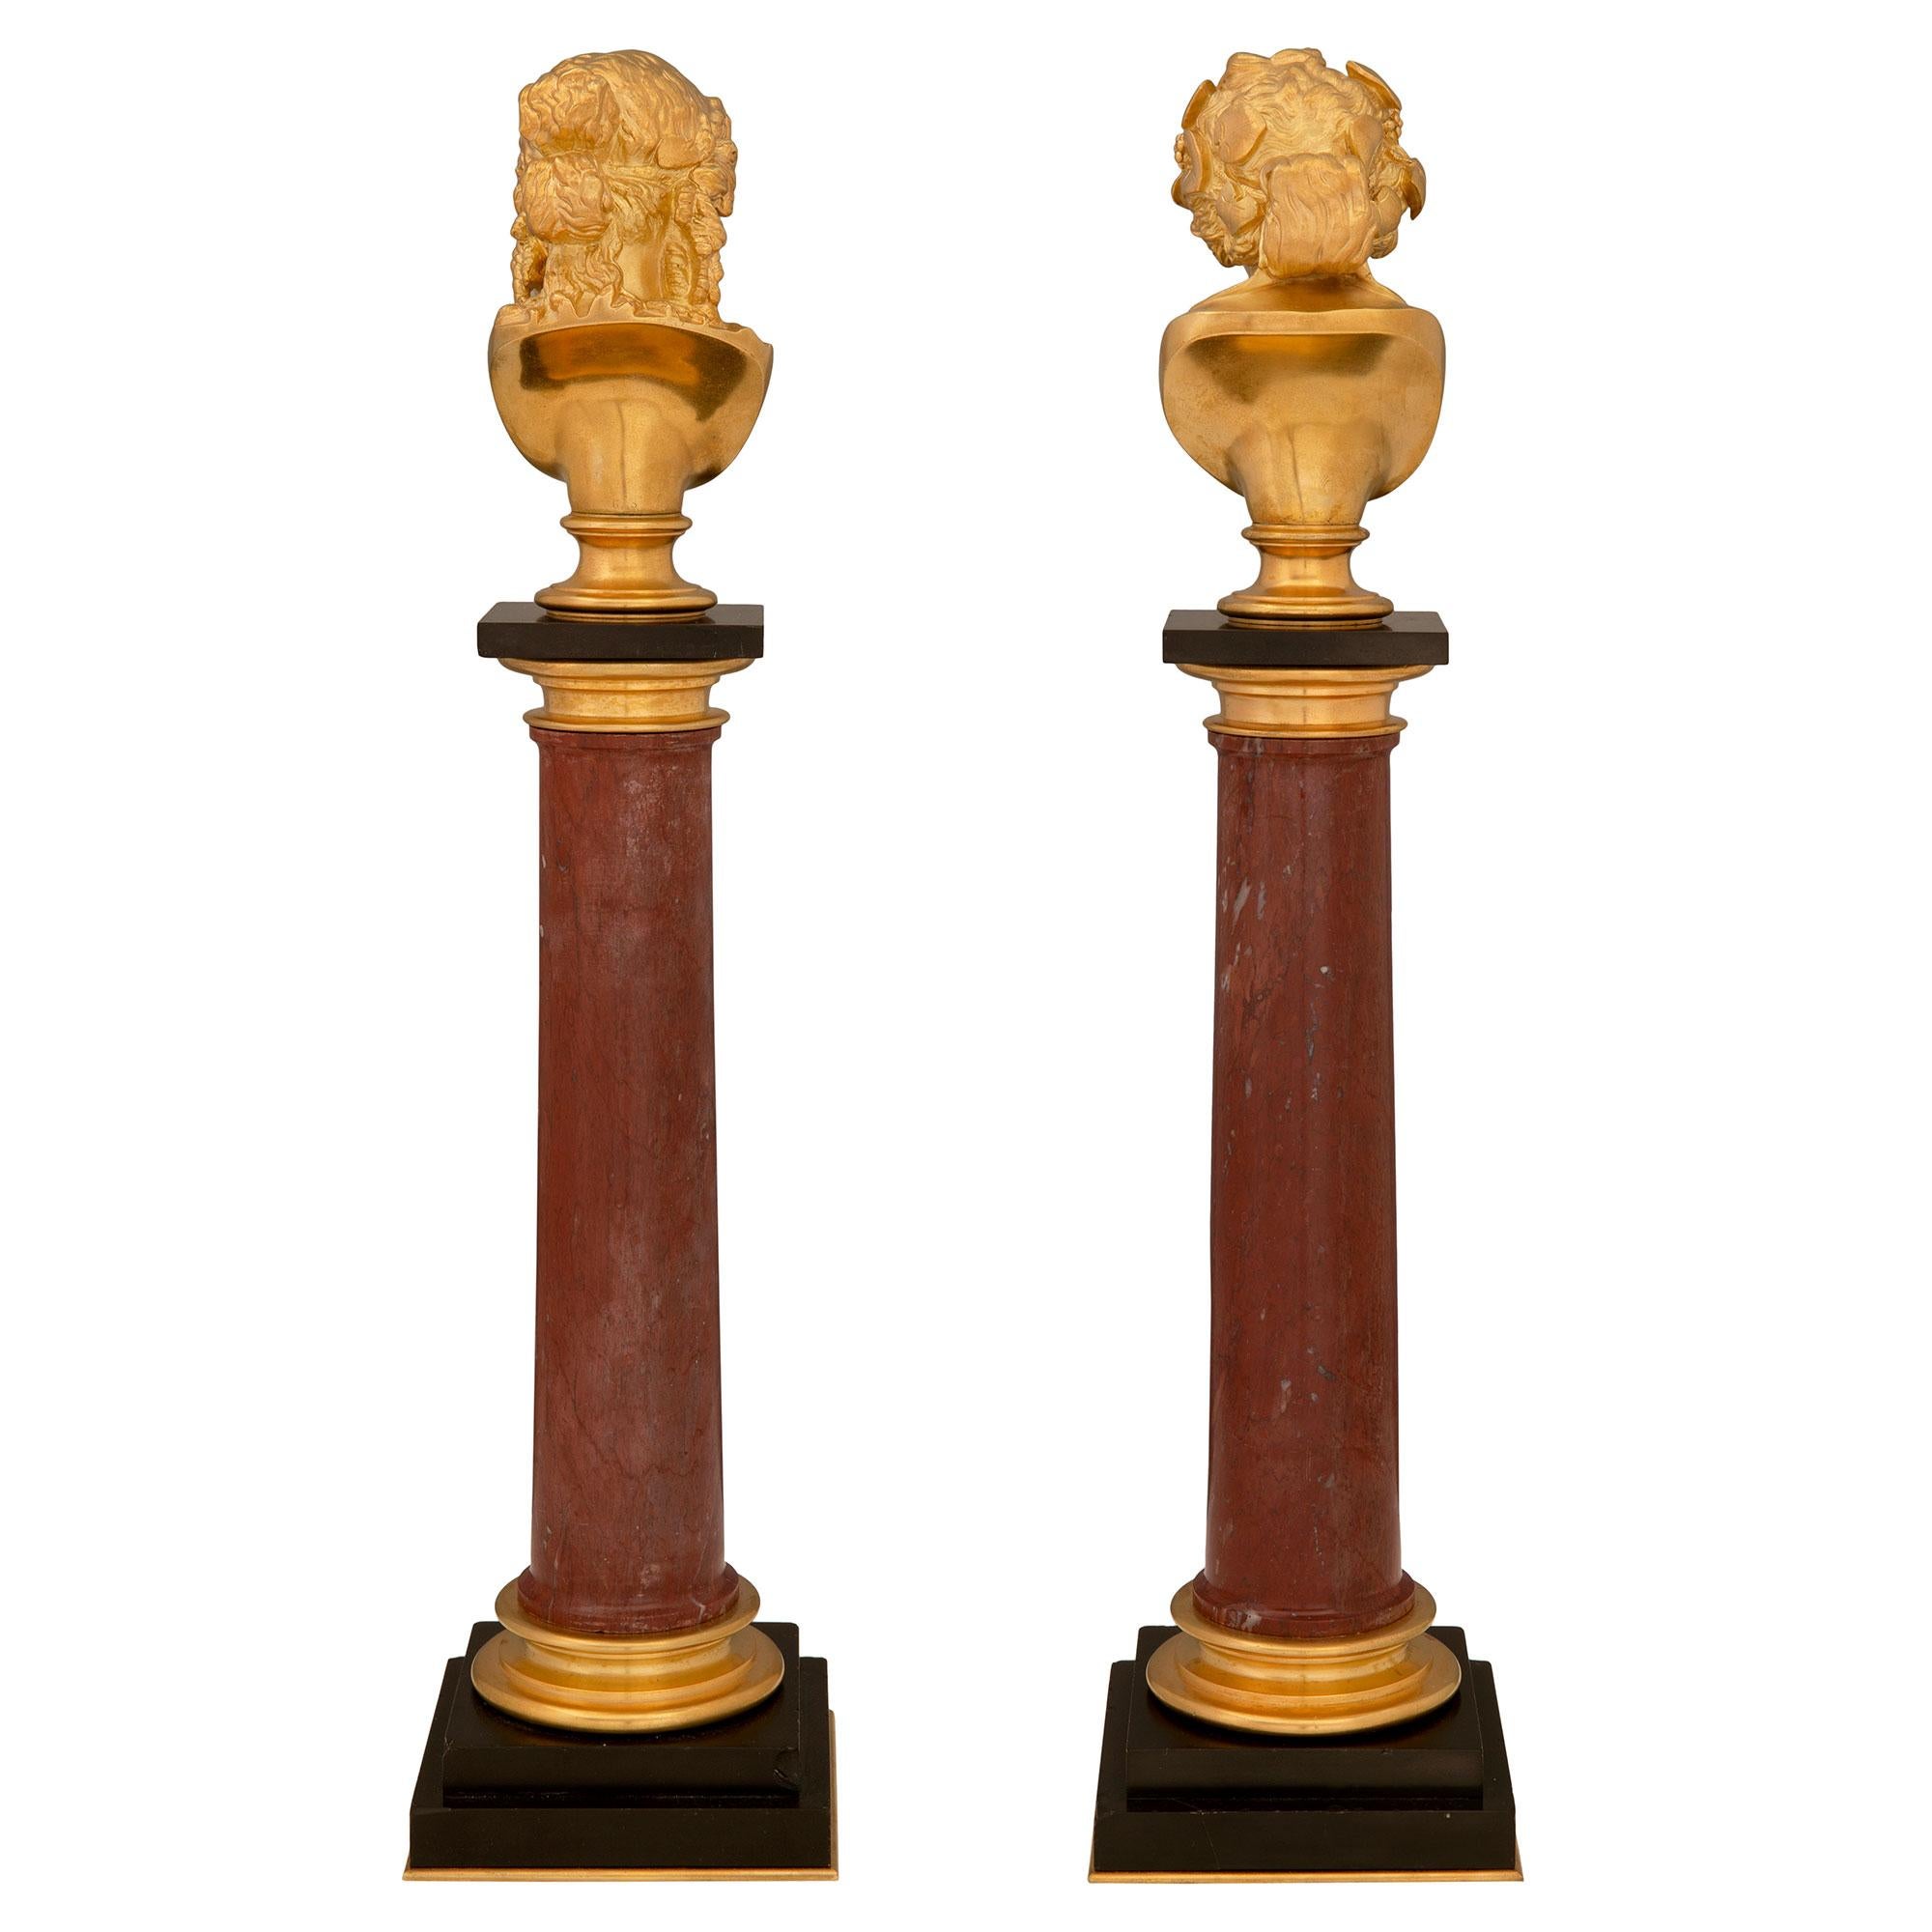 Italian 19th Century Neoclassical Style Ormolu and Marble Columns with Busts For Sale 5